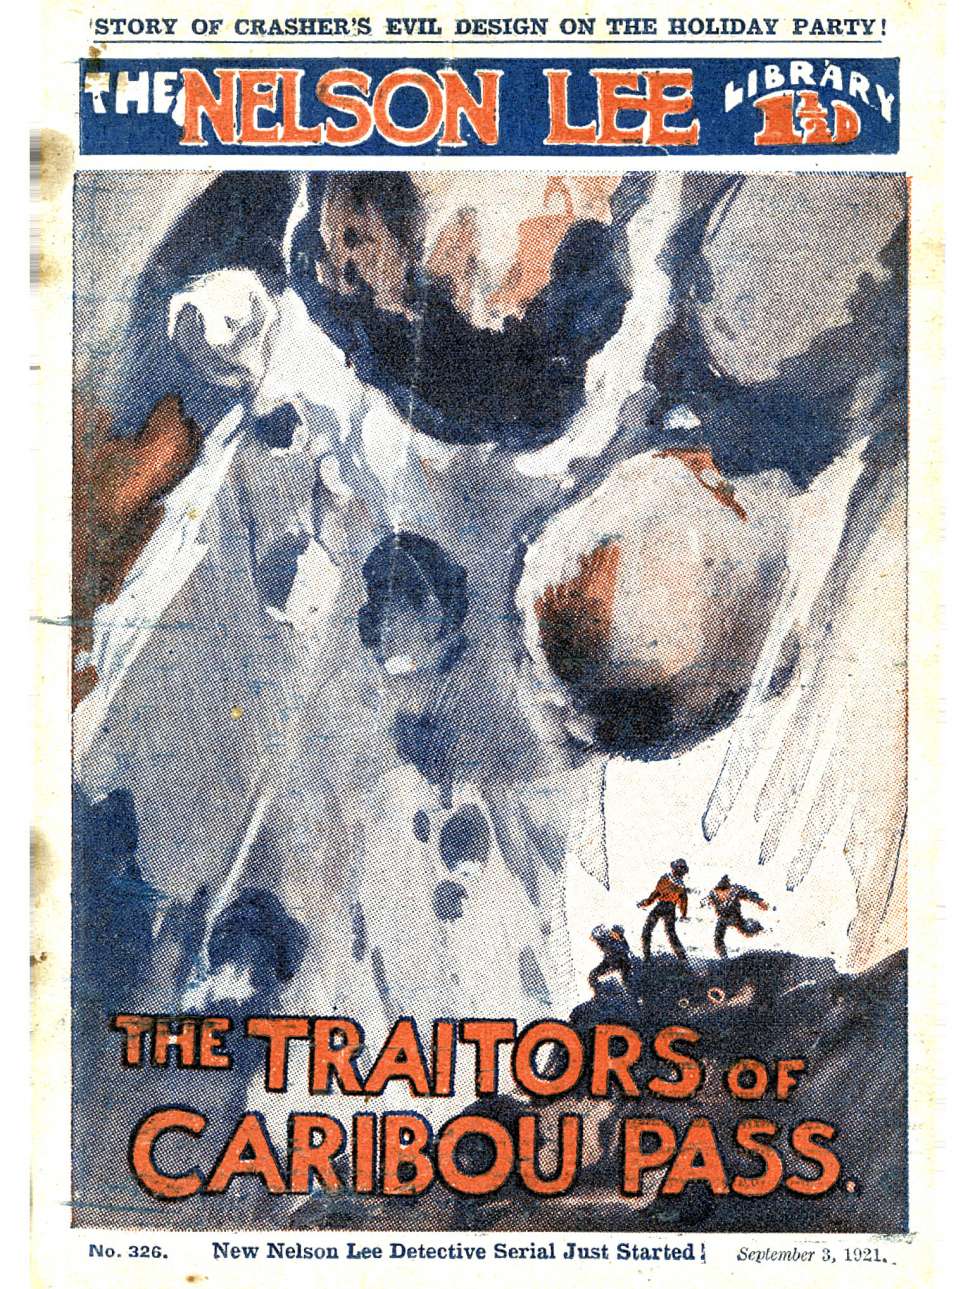 Comic Book Cover For Nelson Lee Library s1 326 - The Traitors of Caribou Pass